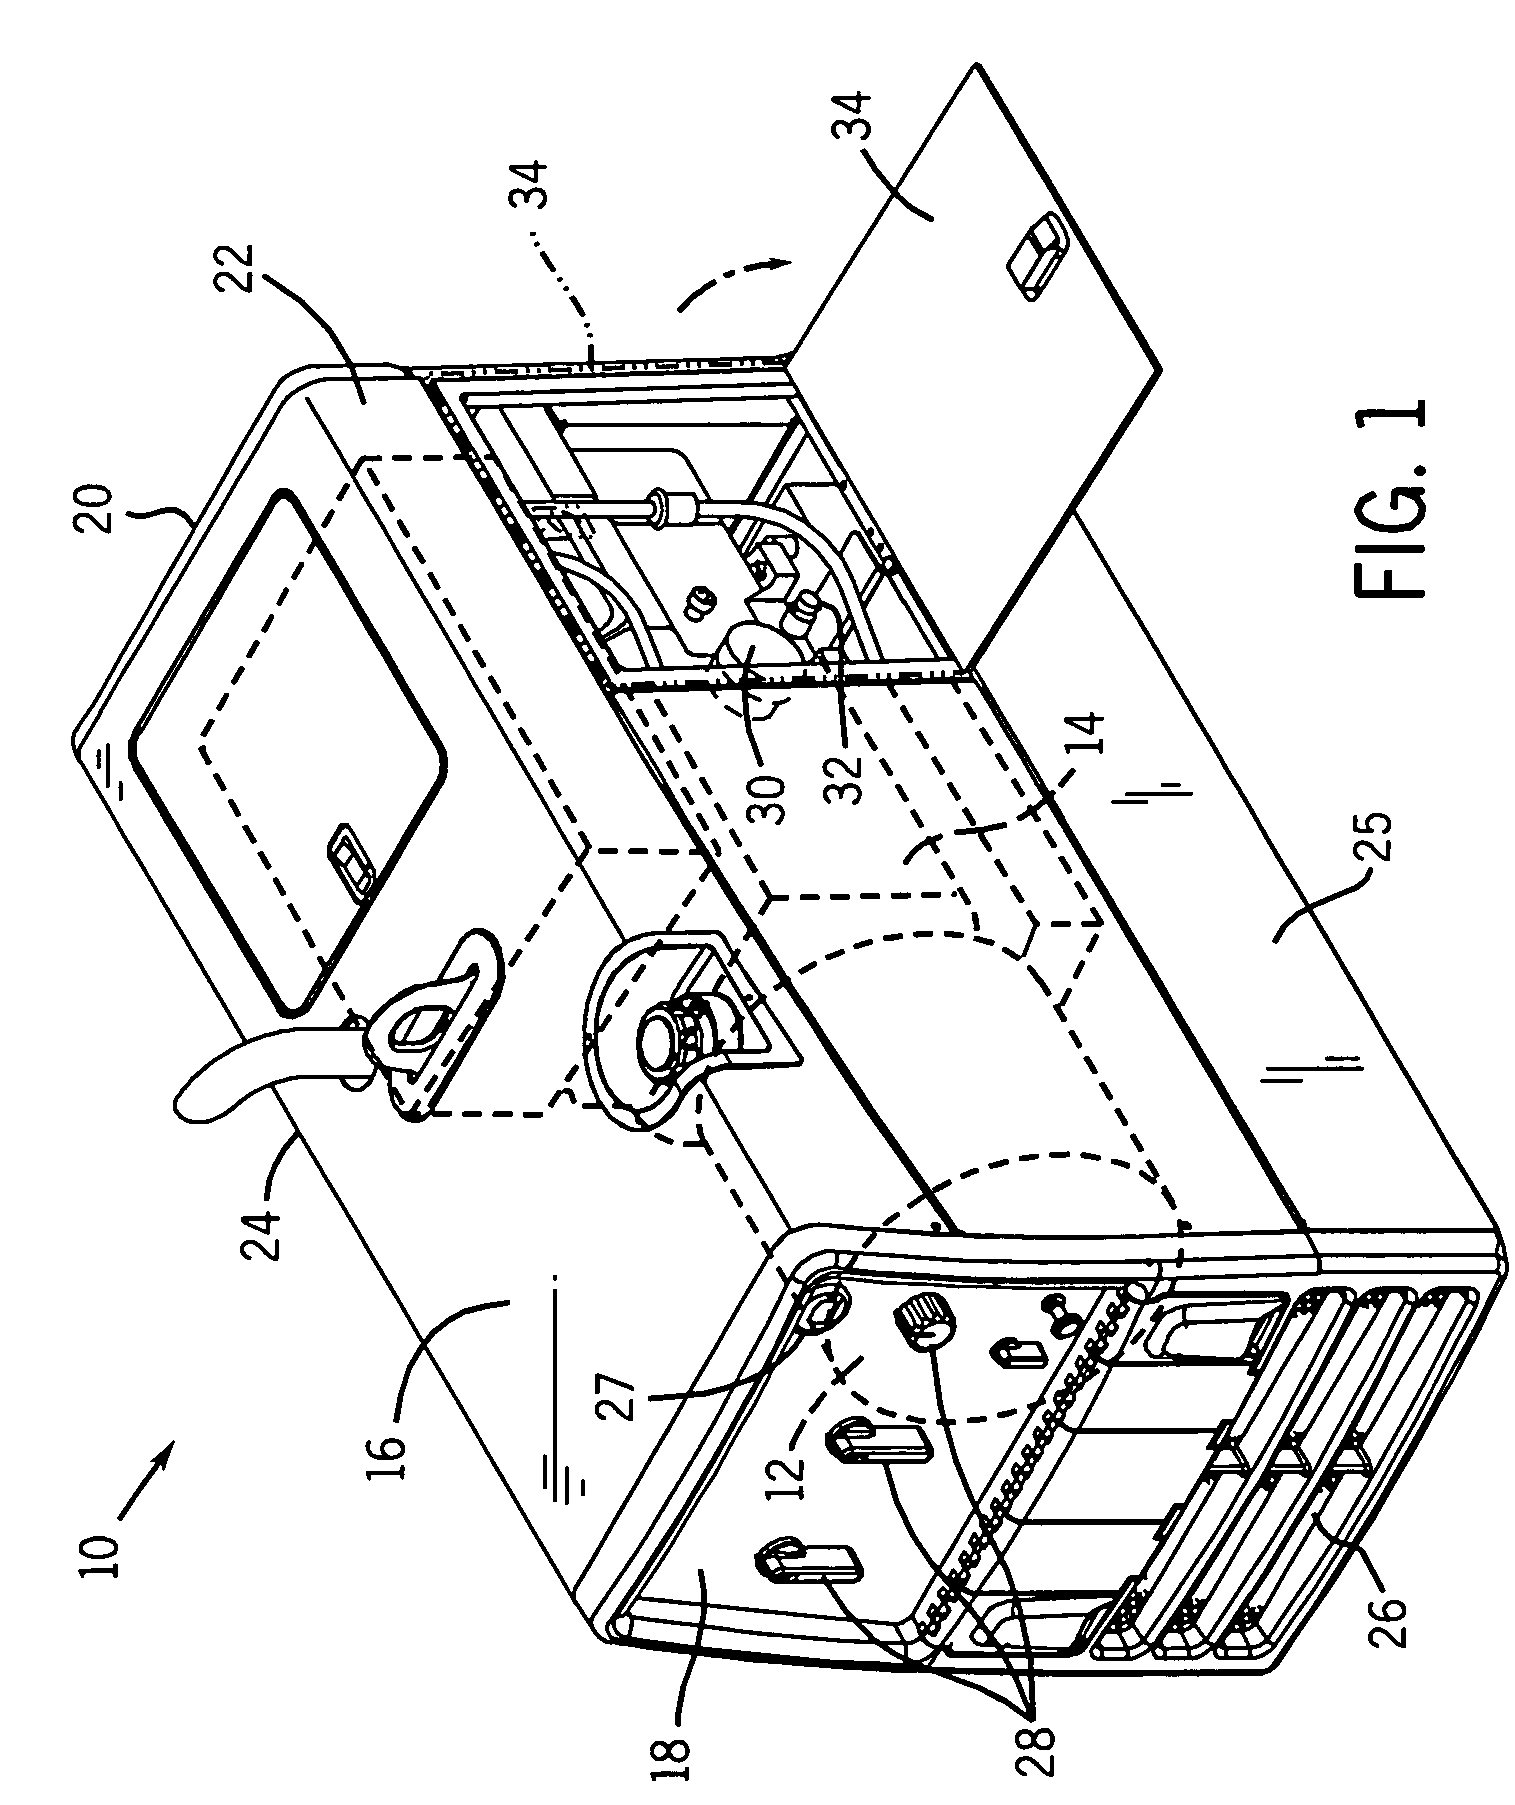 Remote drain and filter arrangement for a portable generator system